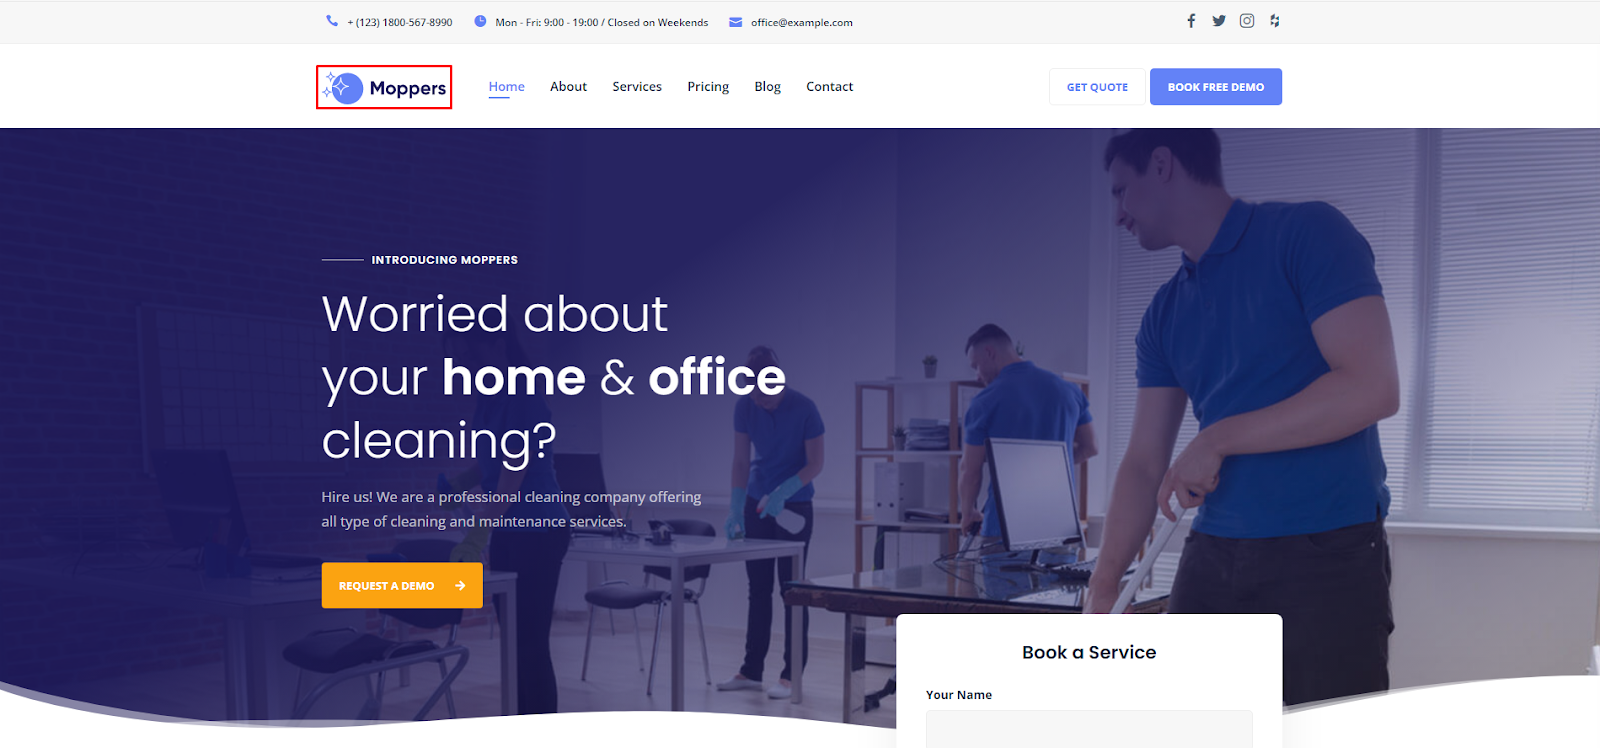 Moppers - Service and Cleaning Company WordPress theme